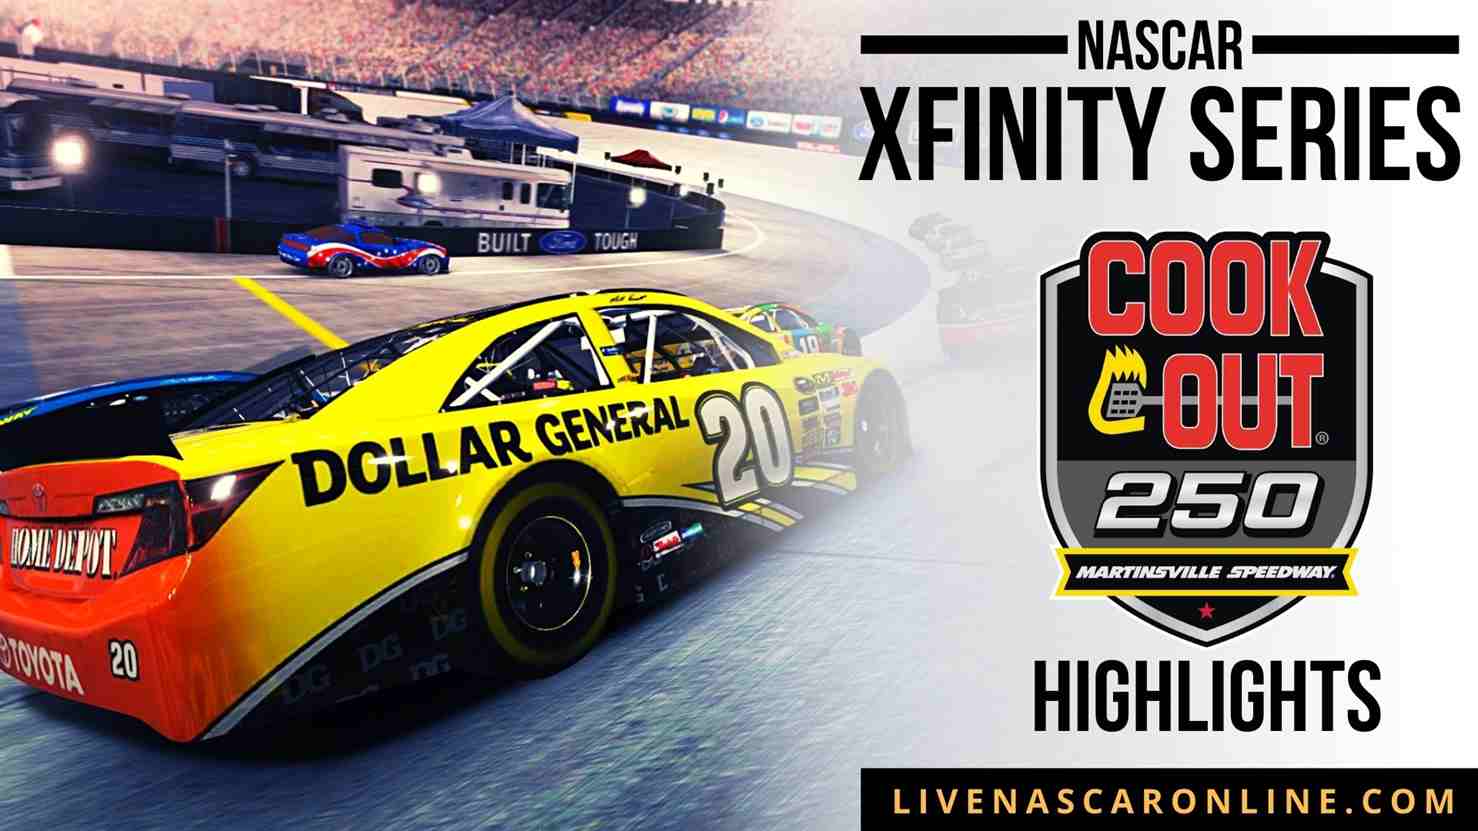 Cook Out 250 Highlights 2021 Nascar Xfinity Series